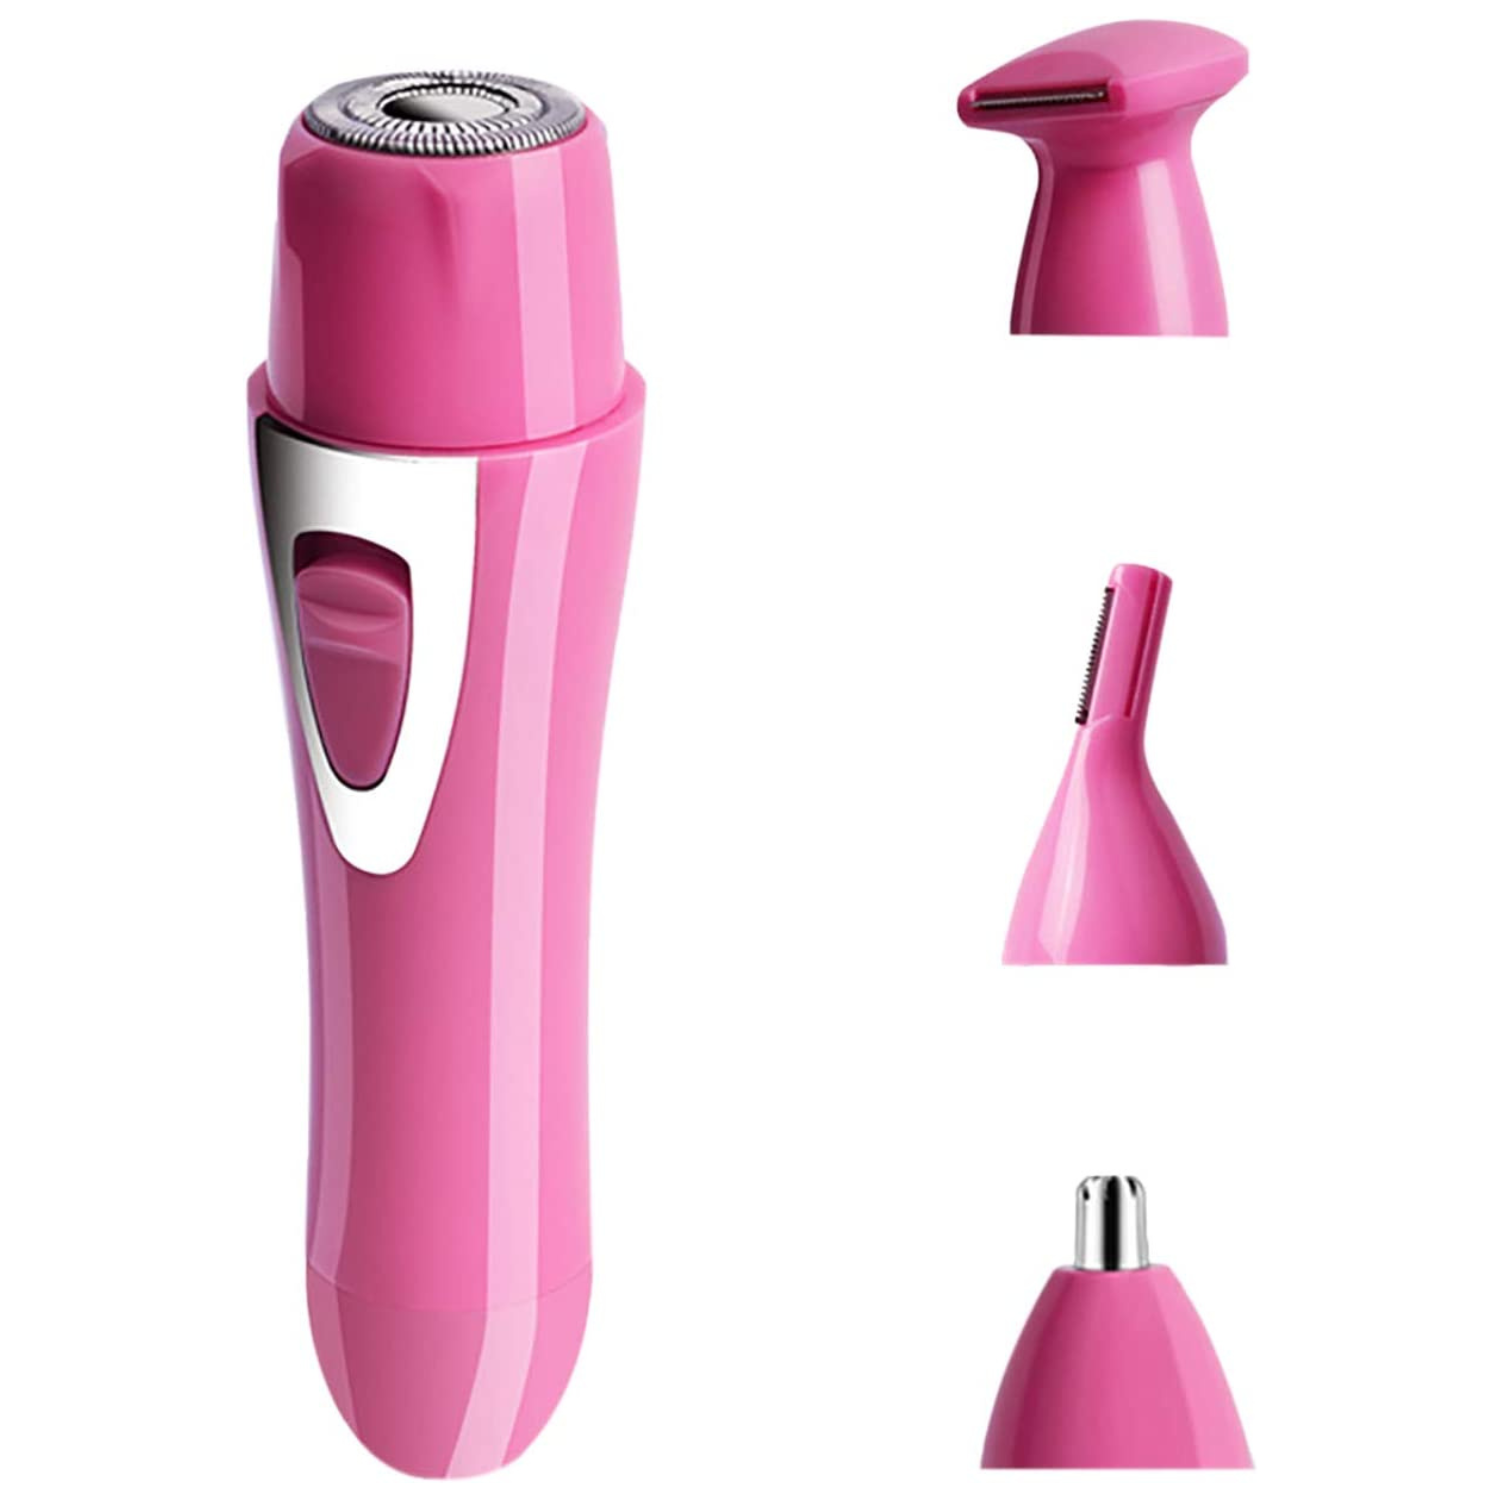 4-in-1 Women's Painless Compact Electric Facial Hair Epilator Remover